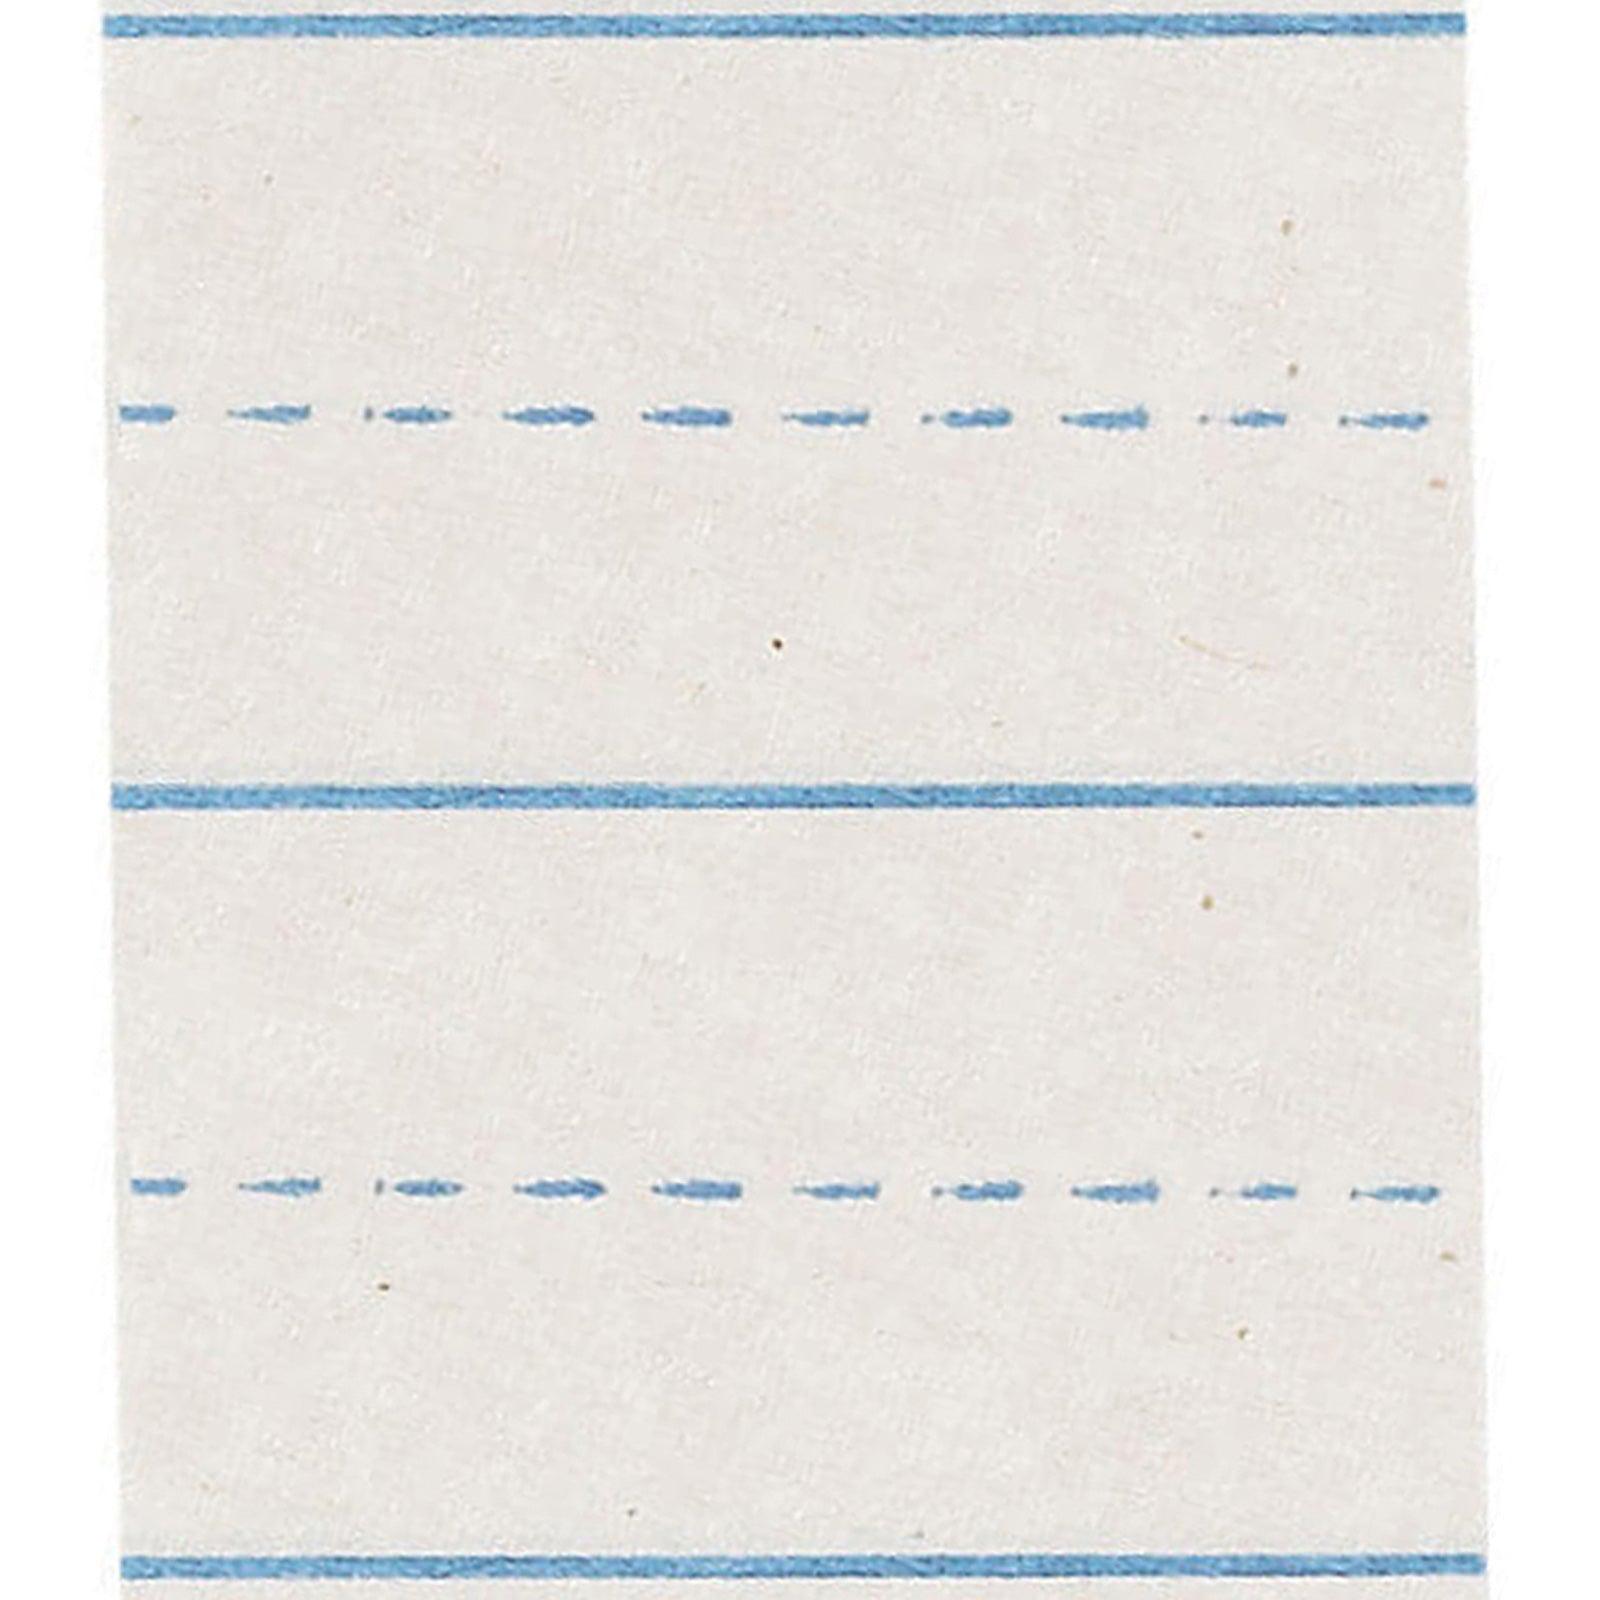 Newsprint Handwriting Paper, Picture Story, 7/8" x 7/16" Ruled Long, 18" x 12", 500 Sheets - Loomini